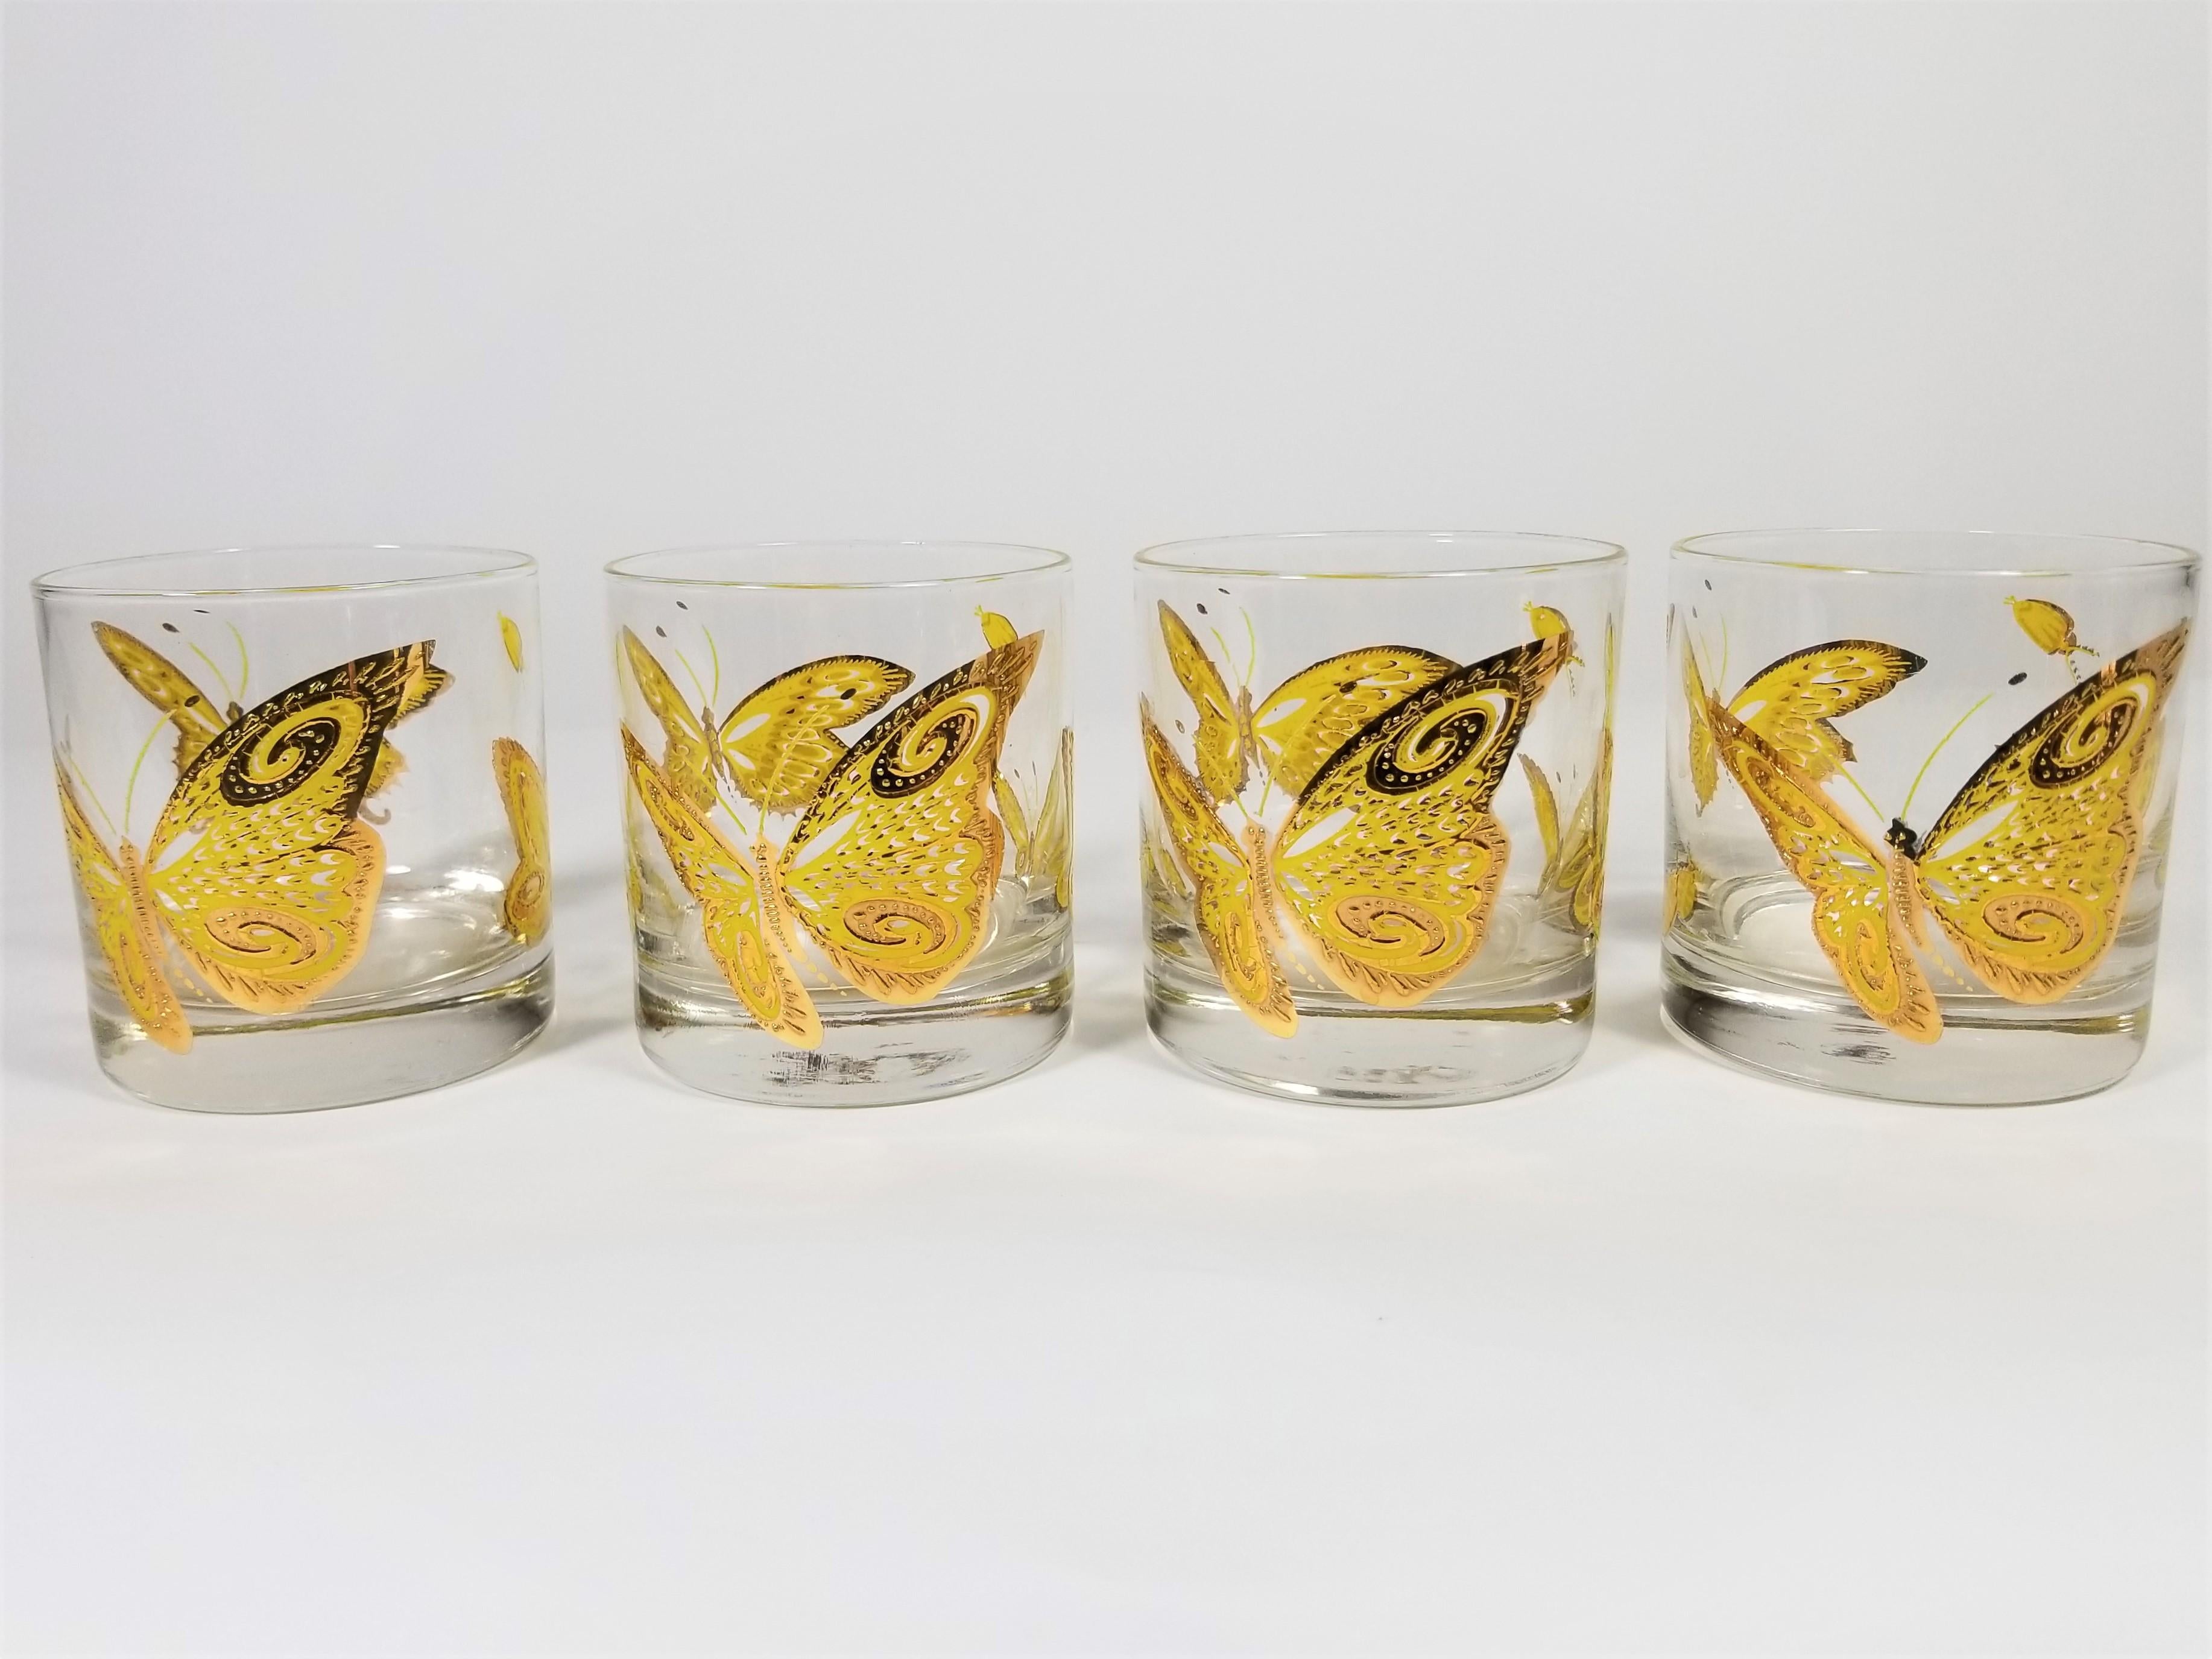 1960s Midcentury glasses with butterfly motif by Culver Inc. 22-karat gold textured design. Set of 4. All glasses are signed and I. Excellent condition.